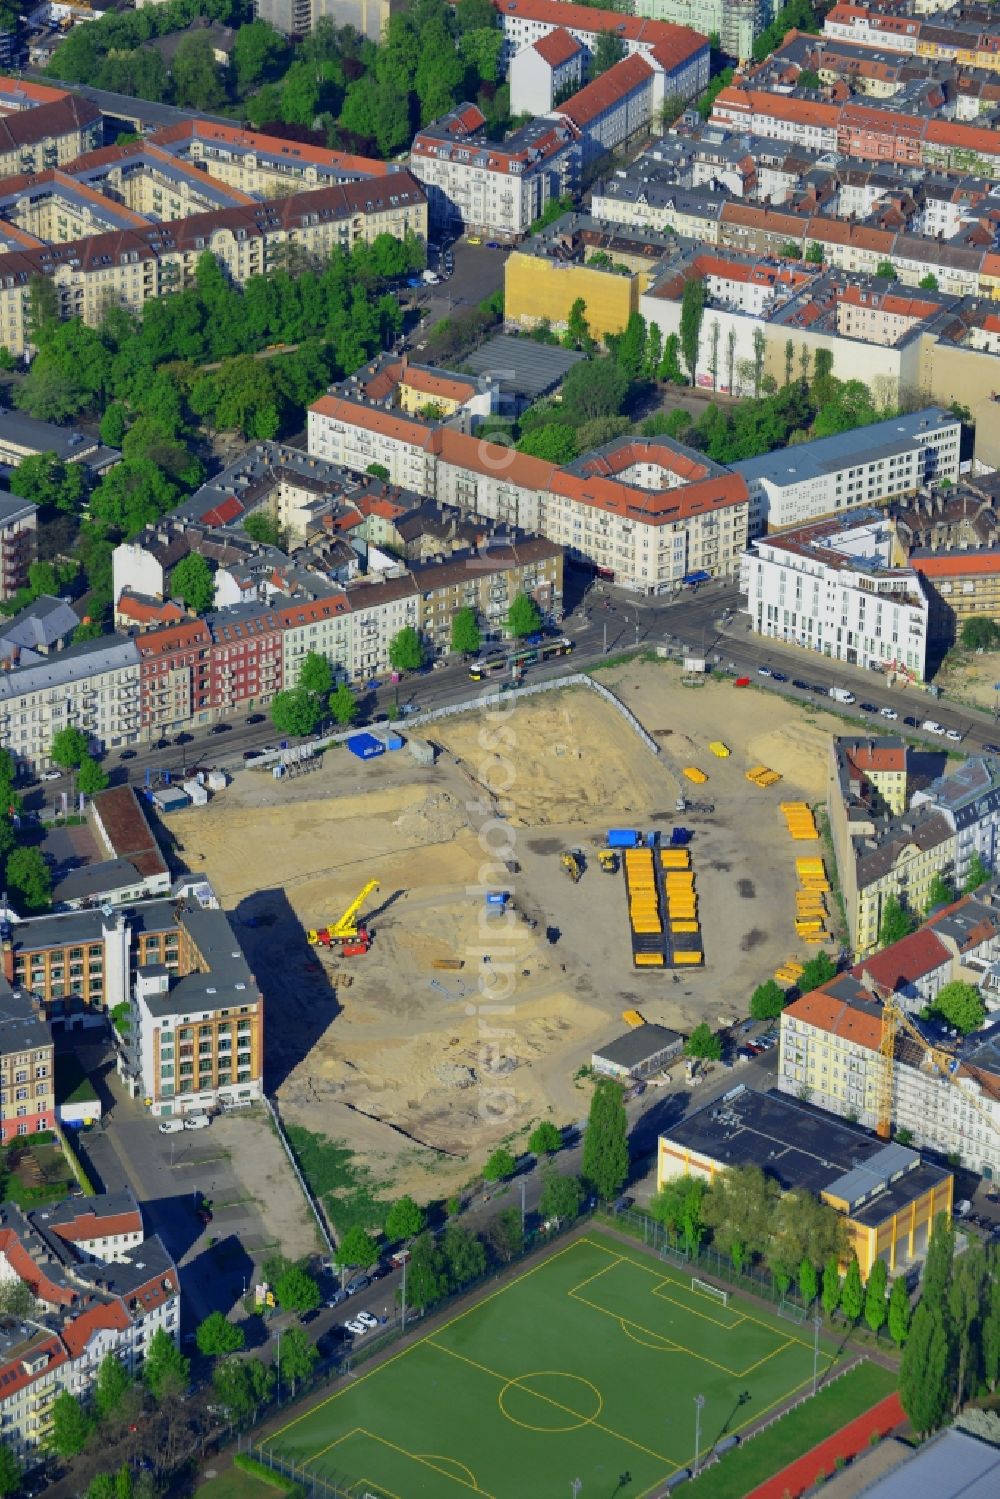 Aerial image Berlin - Site Freudenberg complex in the residential area of the Boxhagener Strasse in Berlin Friedrichshain